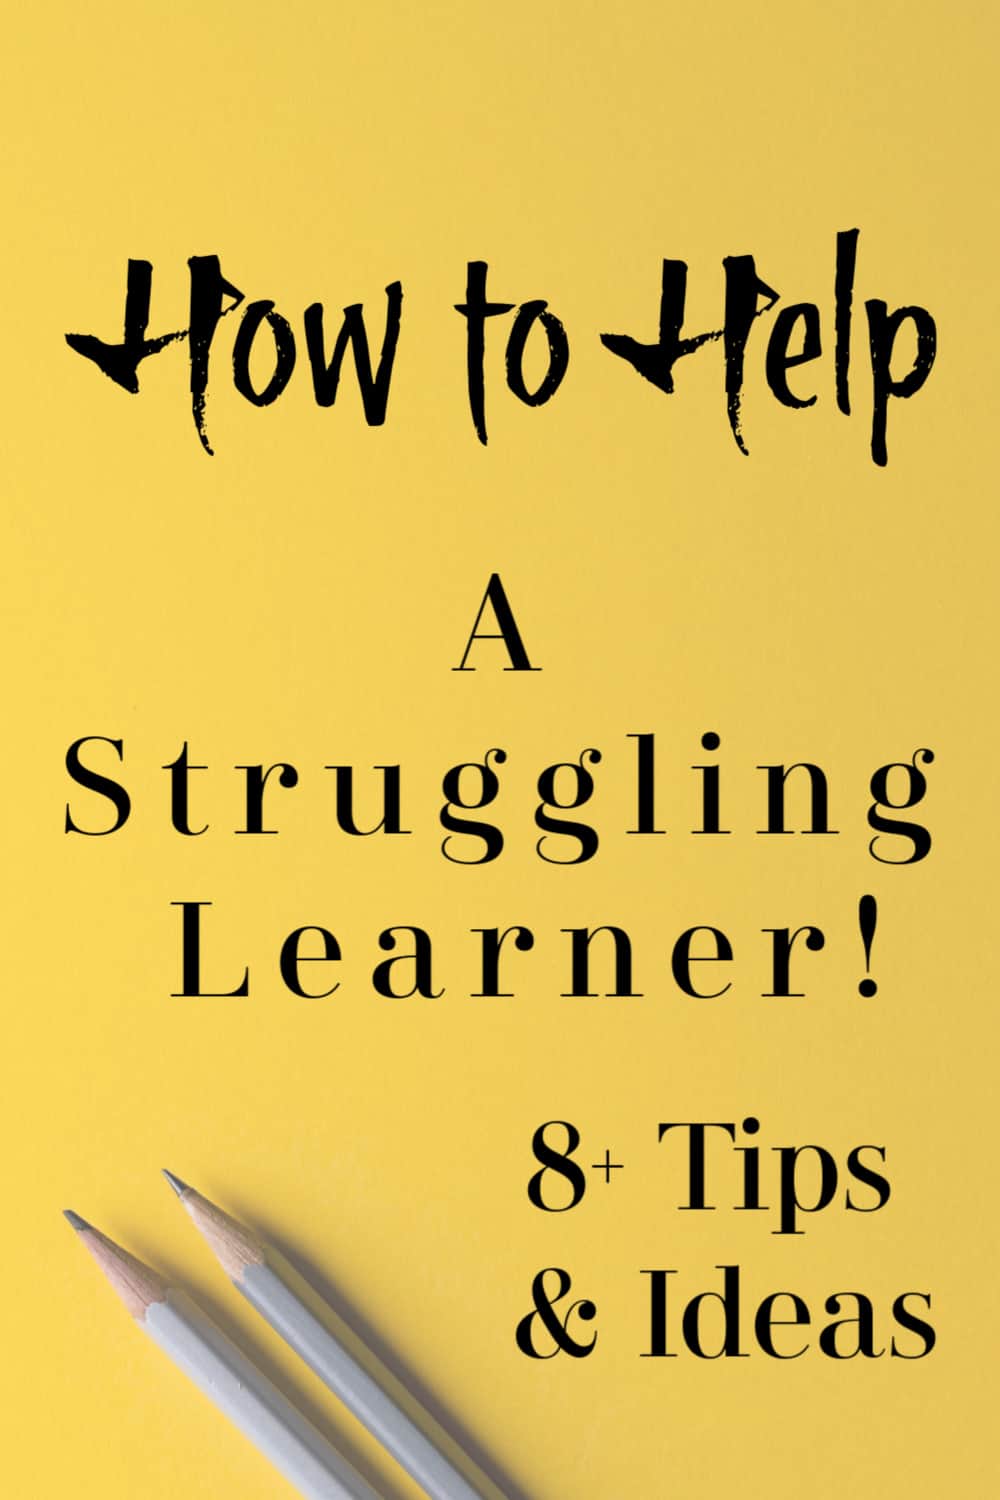 How to help a struggling learner - Tips and ideas to help a struggling learner to thrive. Includes simple tips for parents to help children with education struggles.